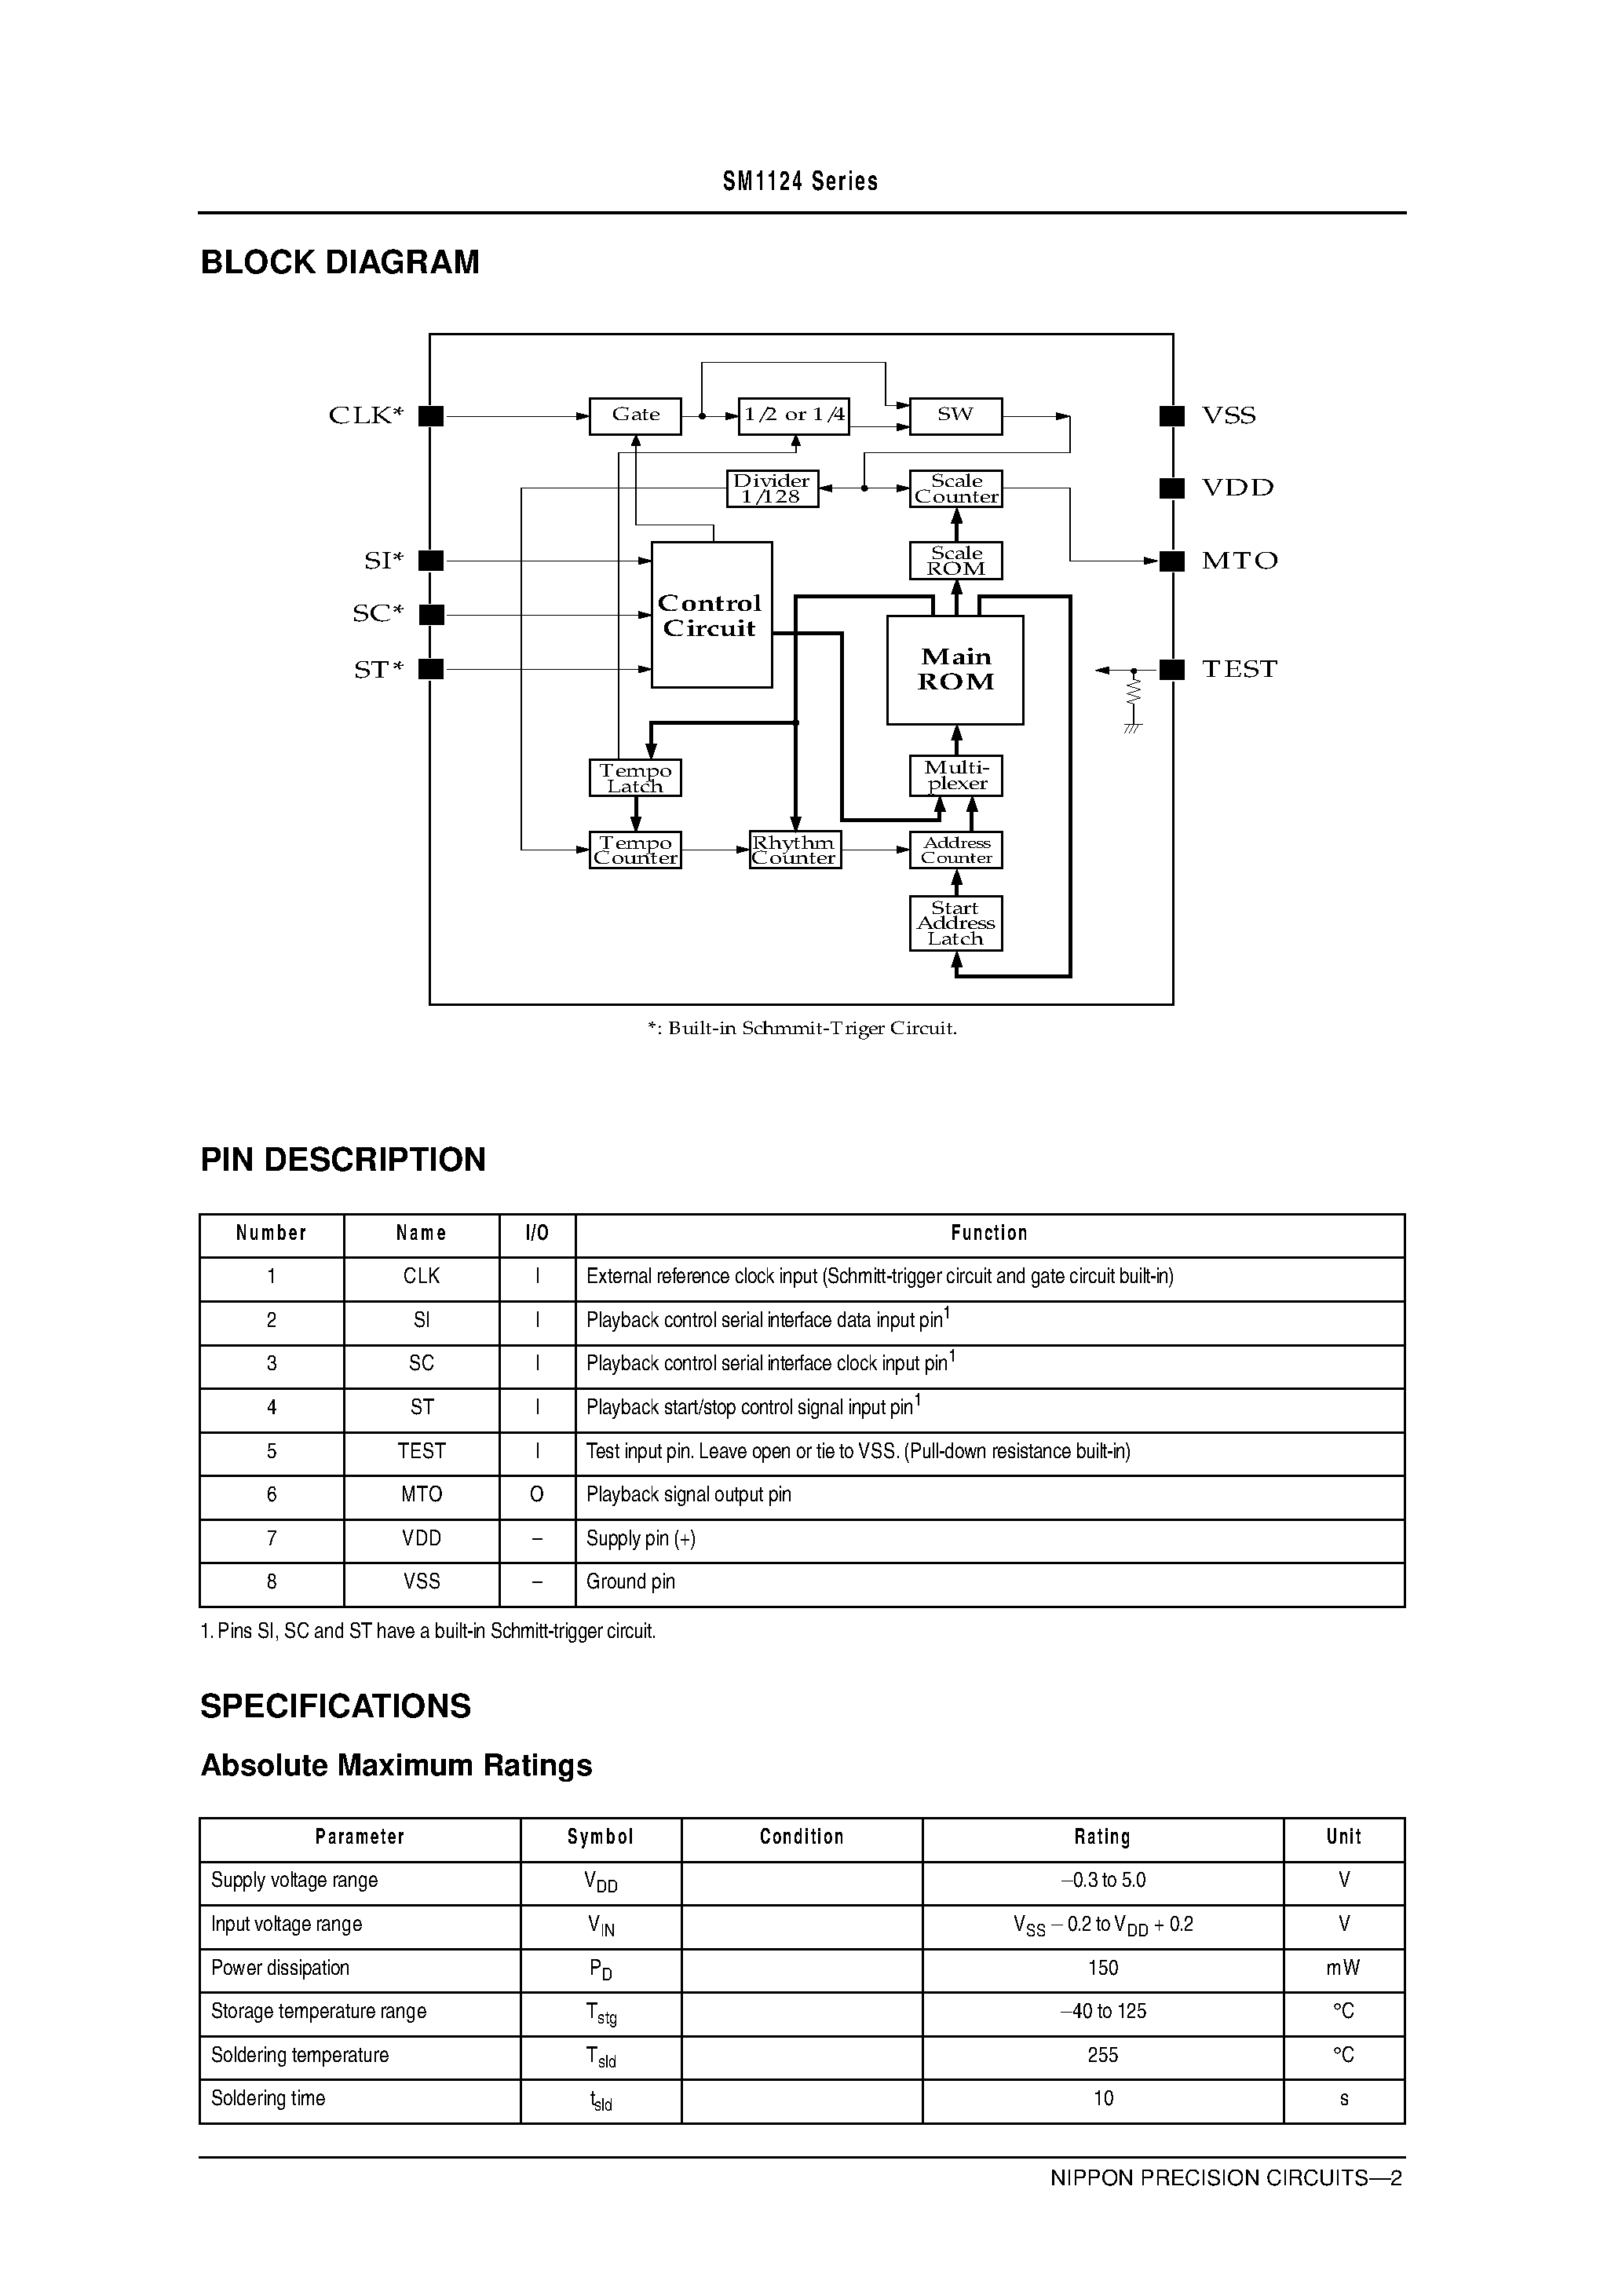 Datasheet SM1124 - Multimelody IC for Pagers page 2